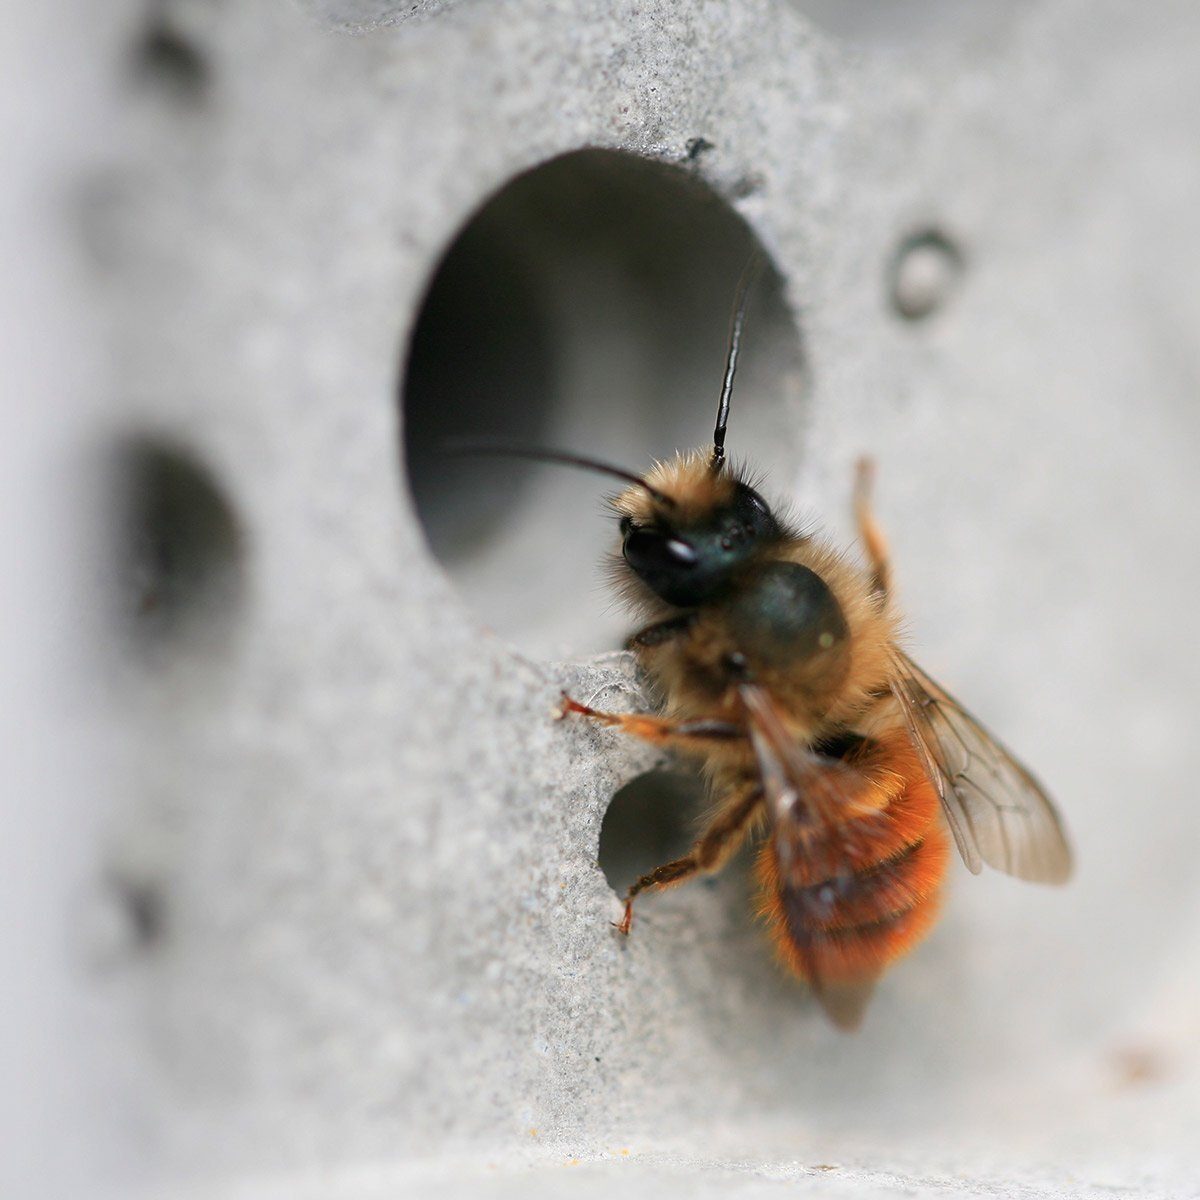 A solitary bee climbs into the prefabricated hole of a concrete Bee Brick